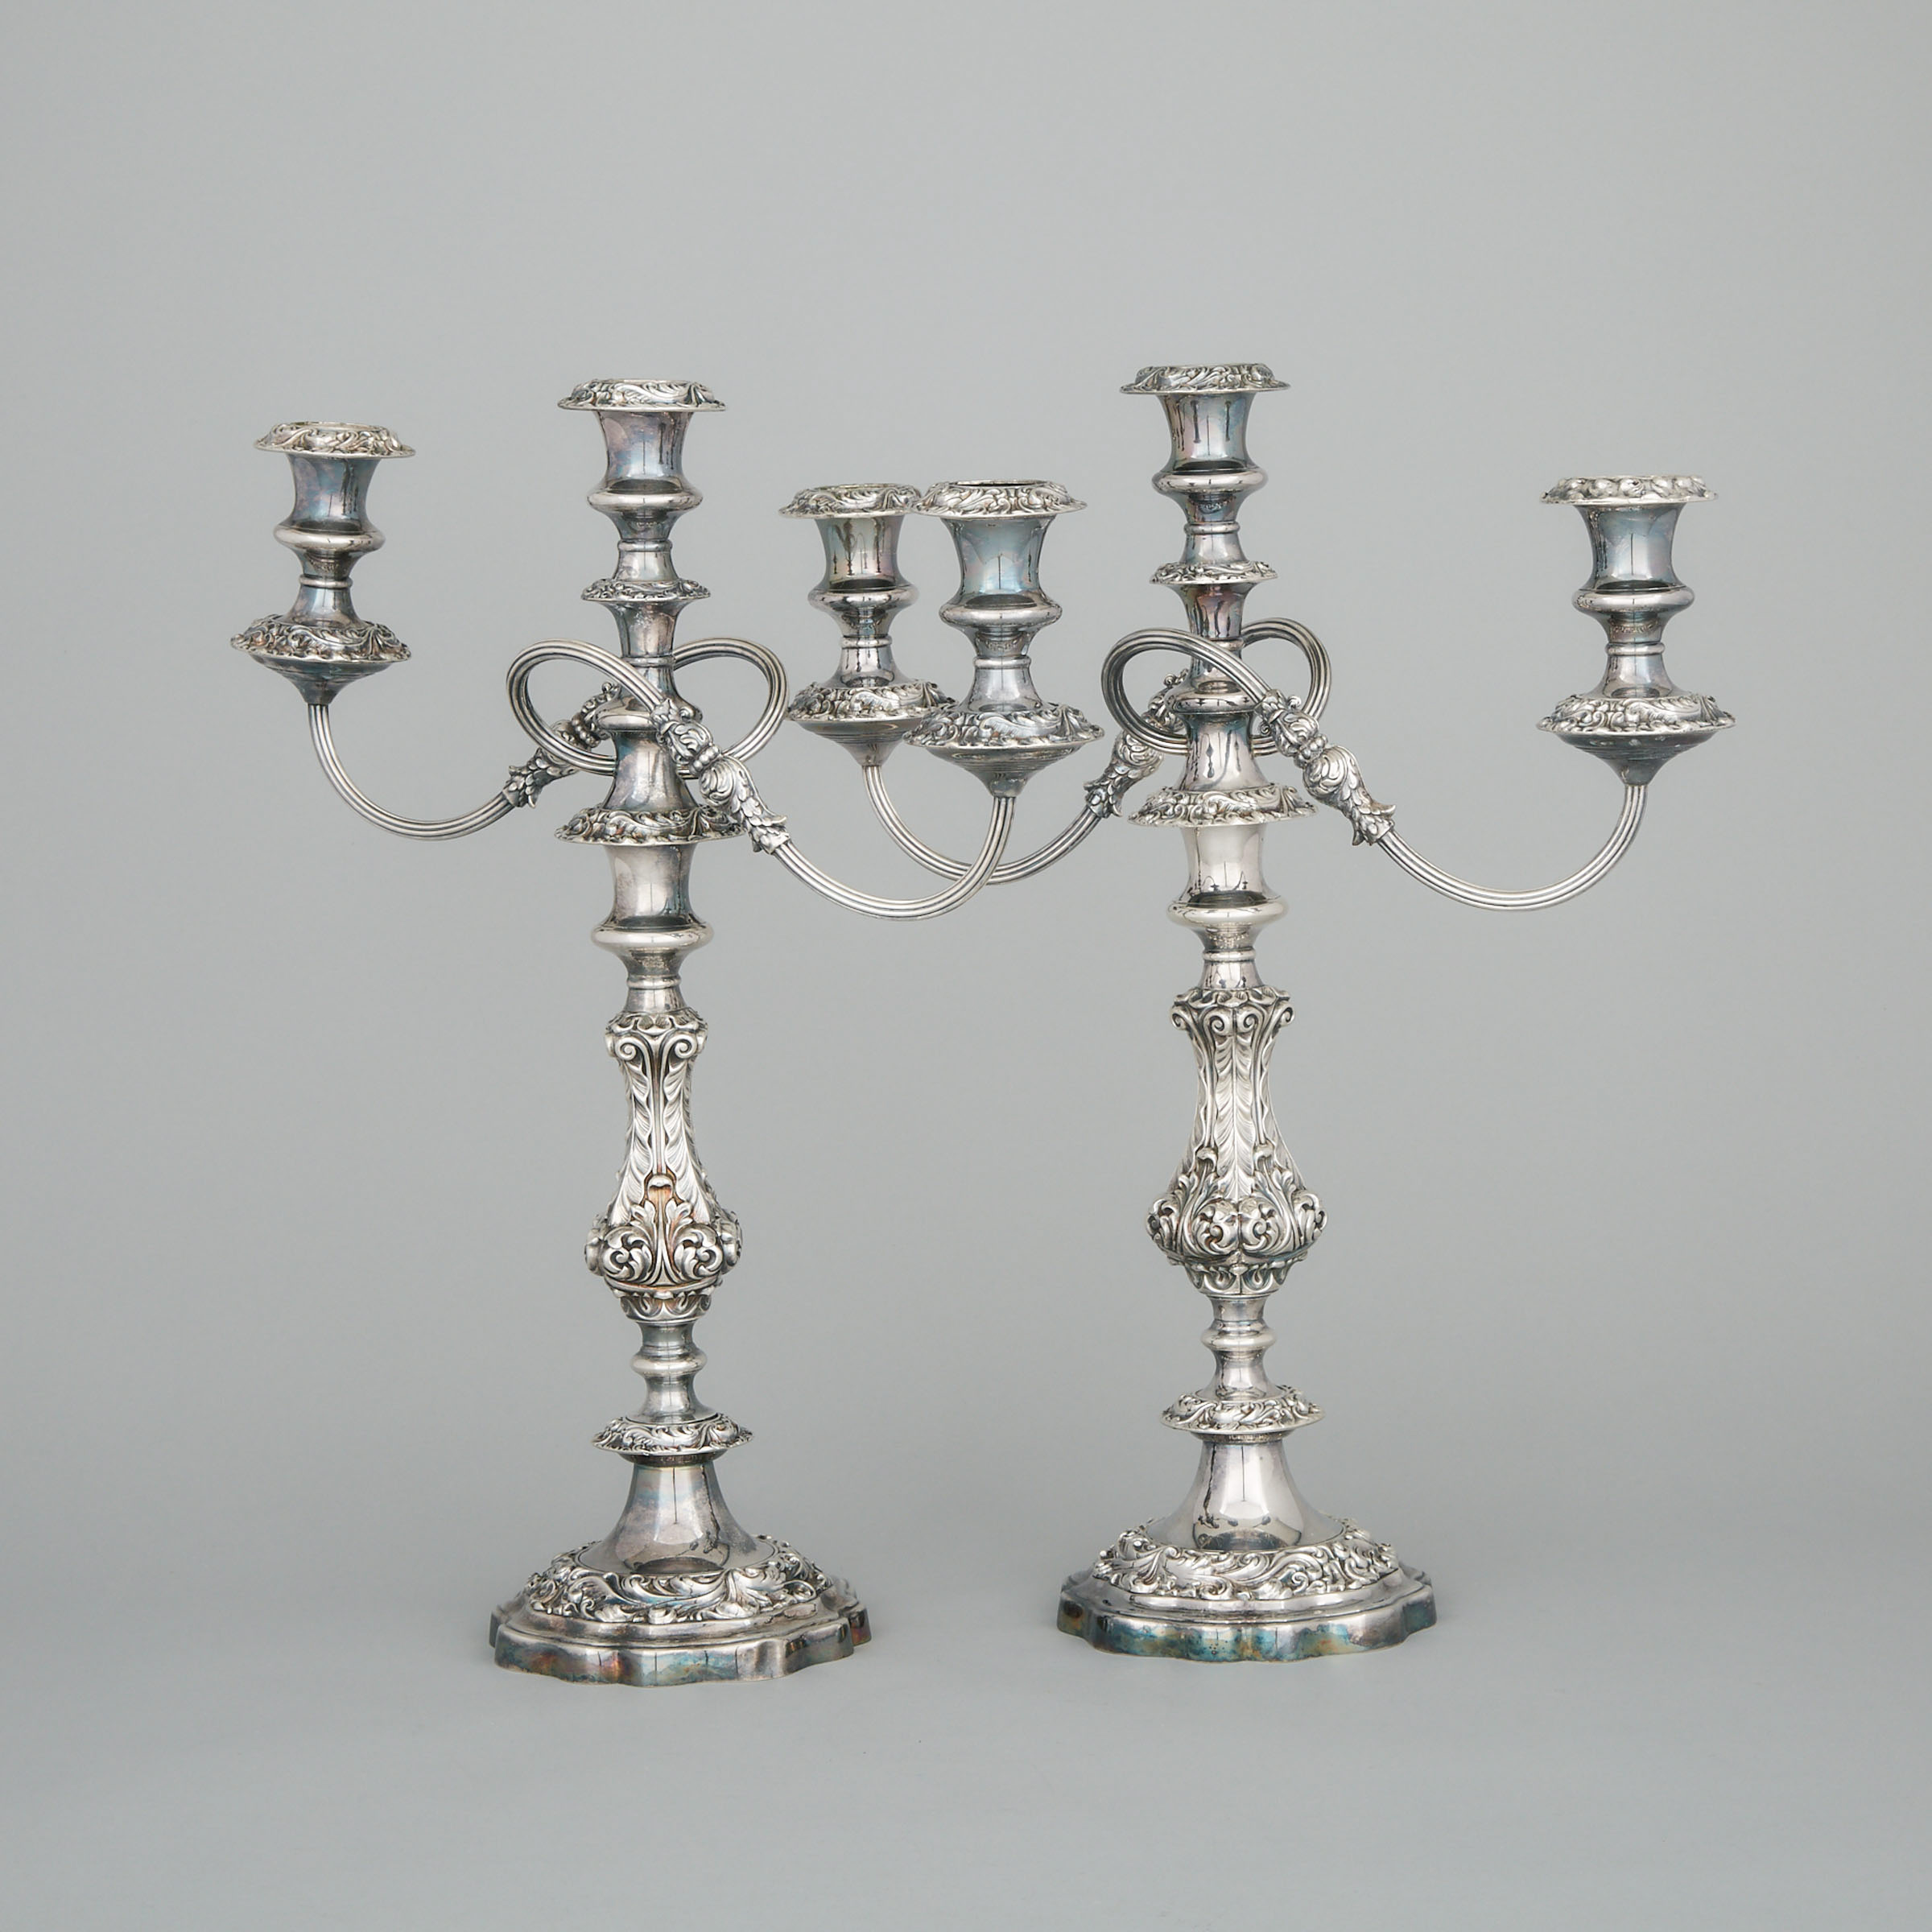 Pair of English 'Regency' Silver Plated Three-Light Candelabra, for Henry Birks & Sons, 20th century 